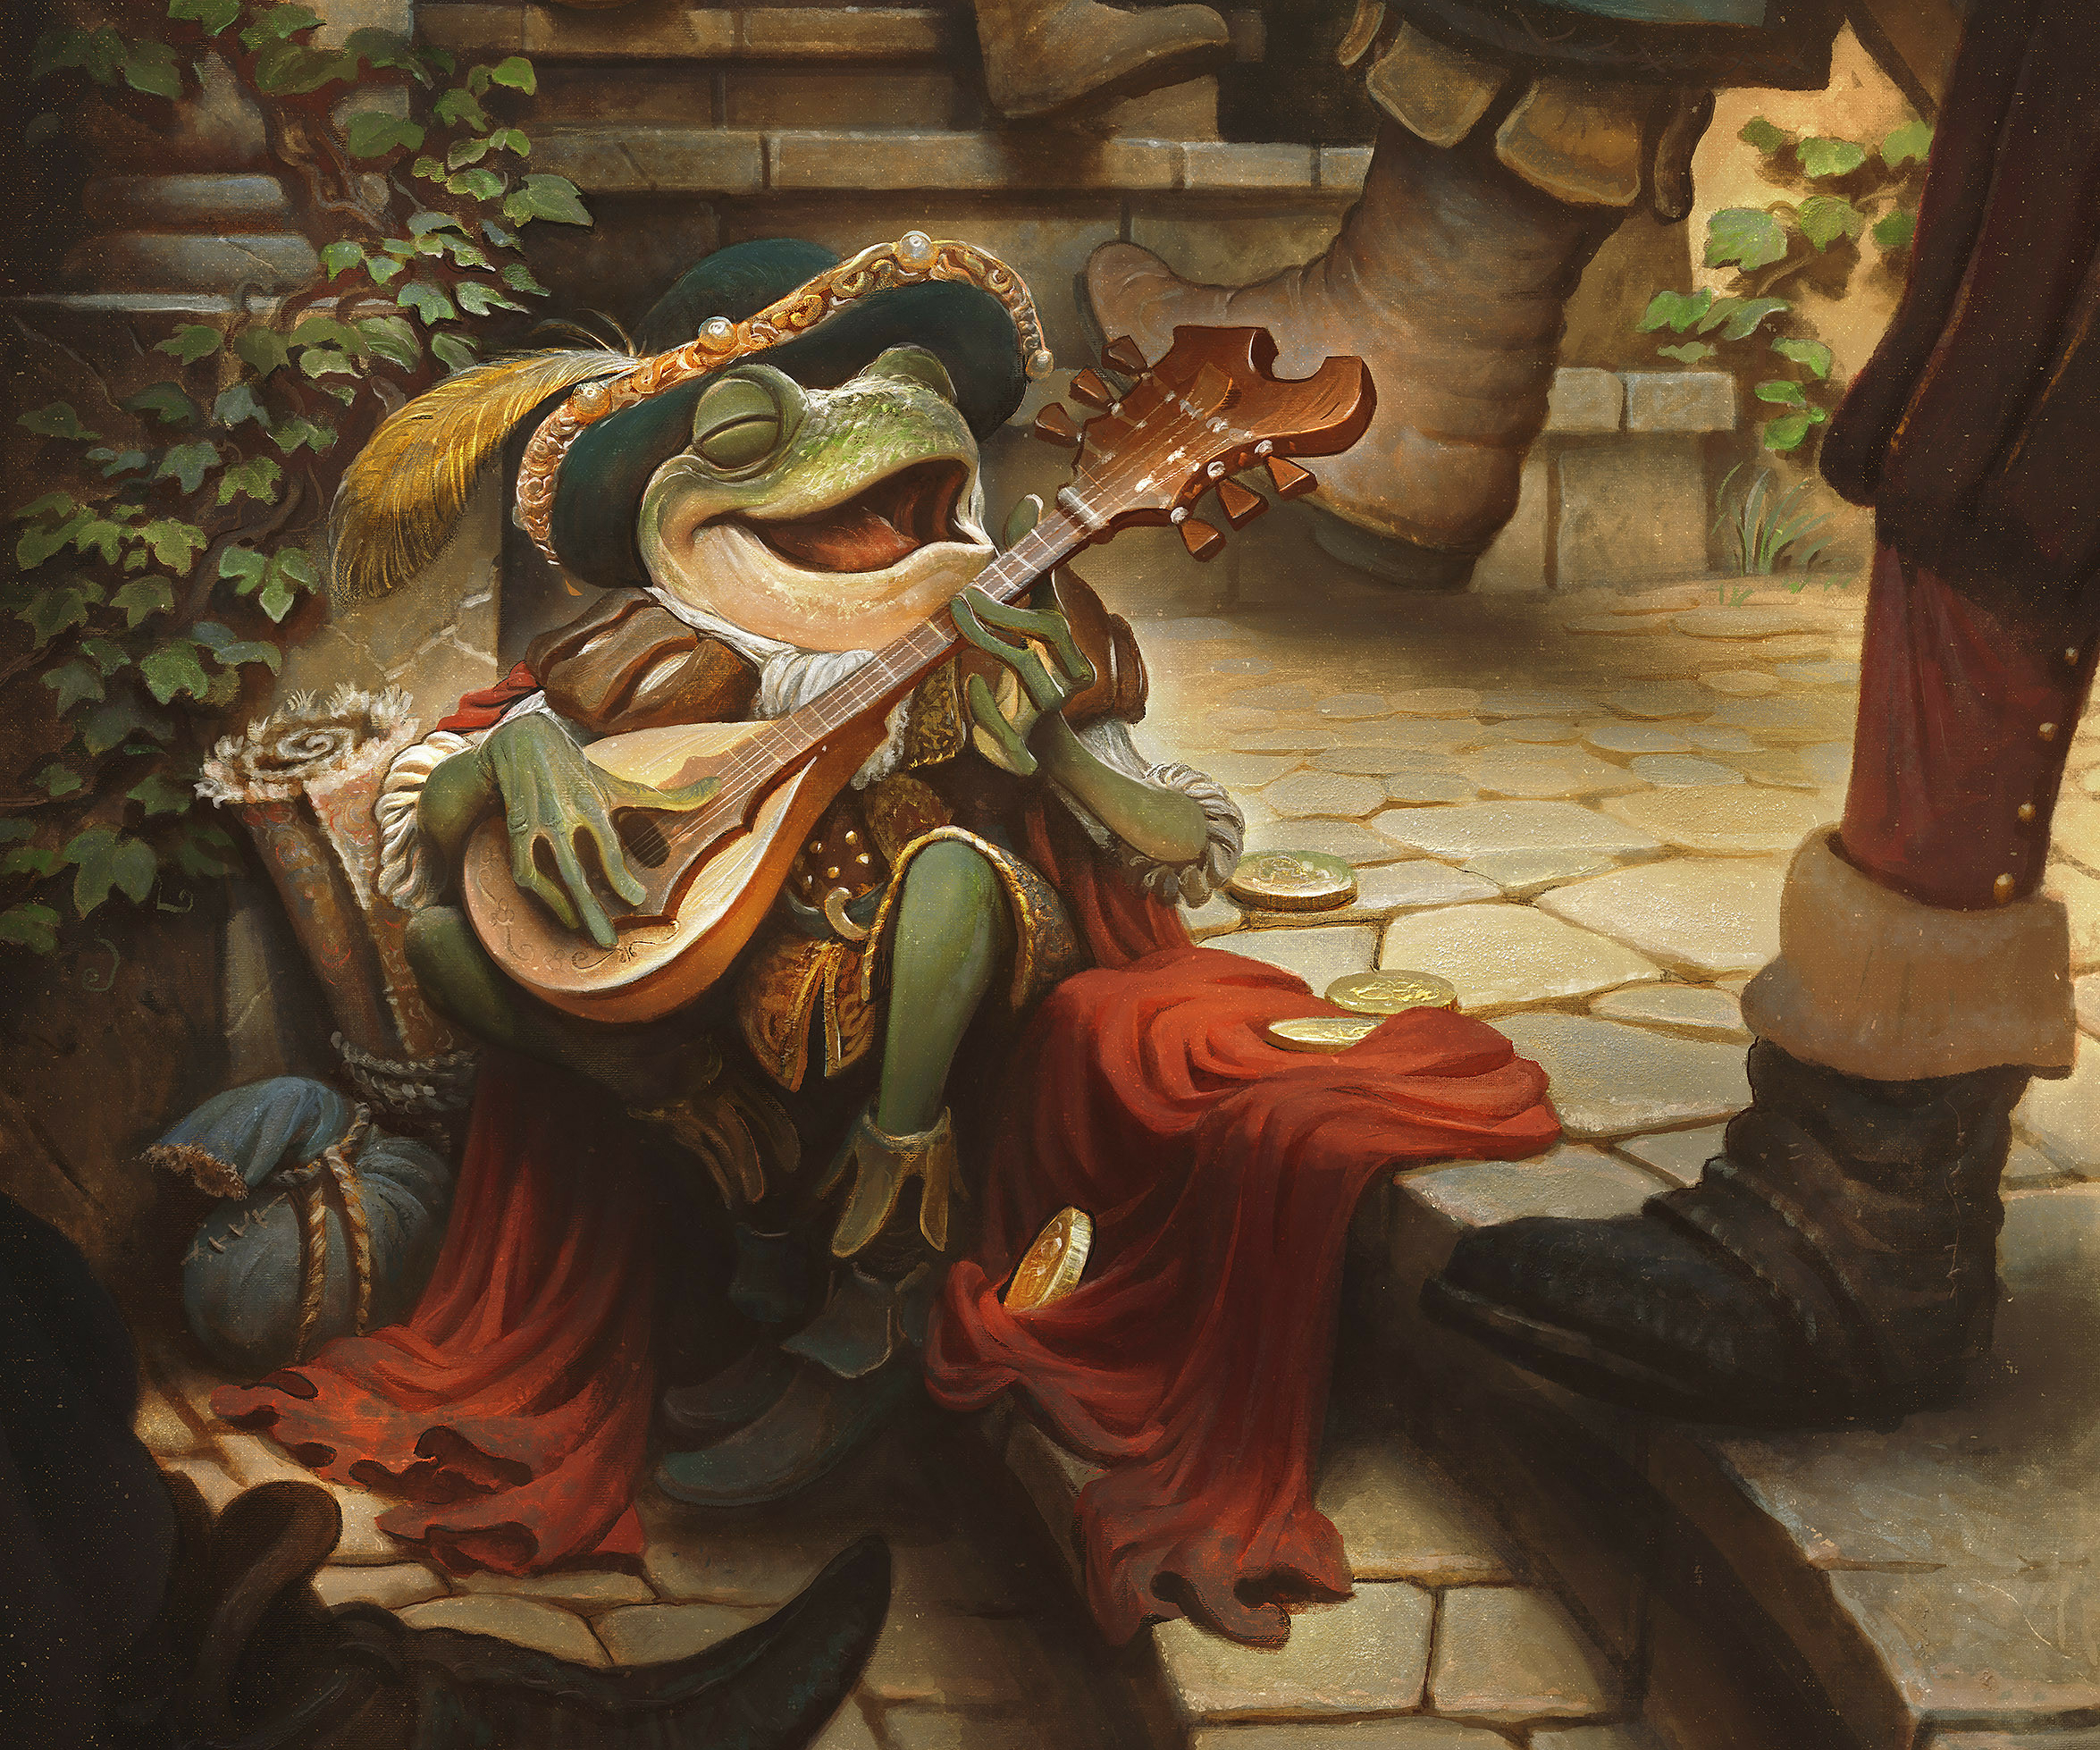 The Frog Bard by Justin Gerard